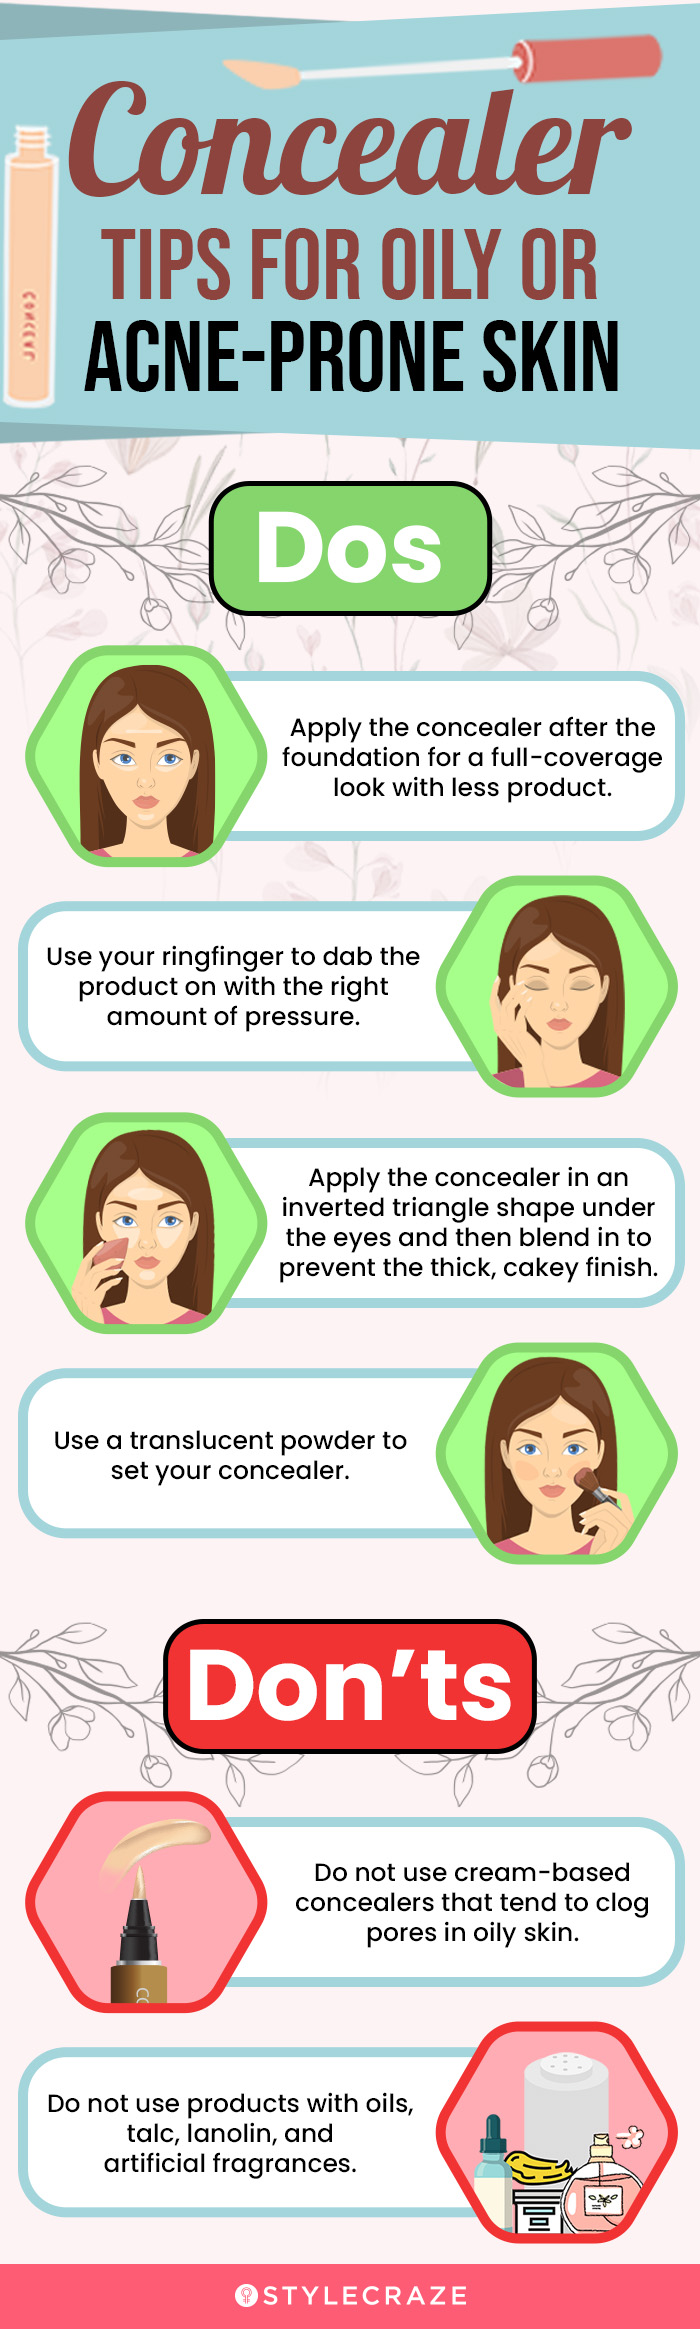 Concealer Tips For Oily Or Acne-Prone Skin (infographic)